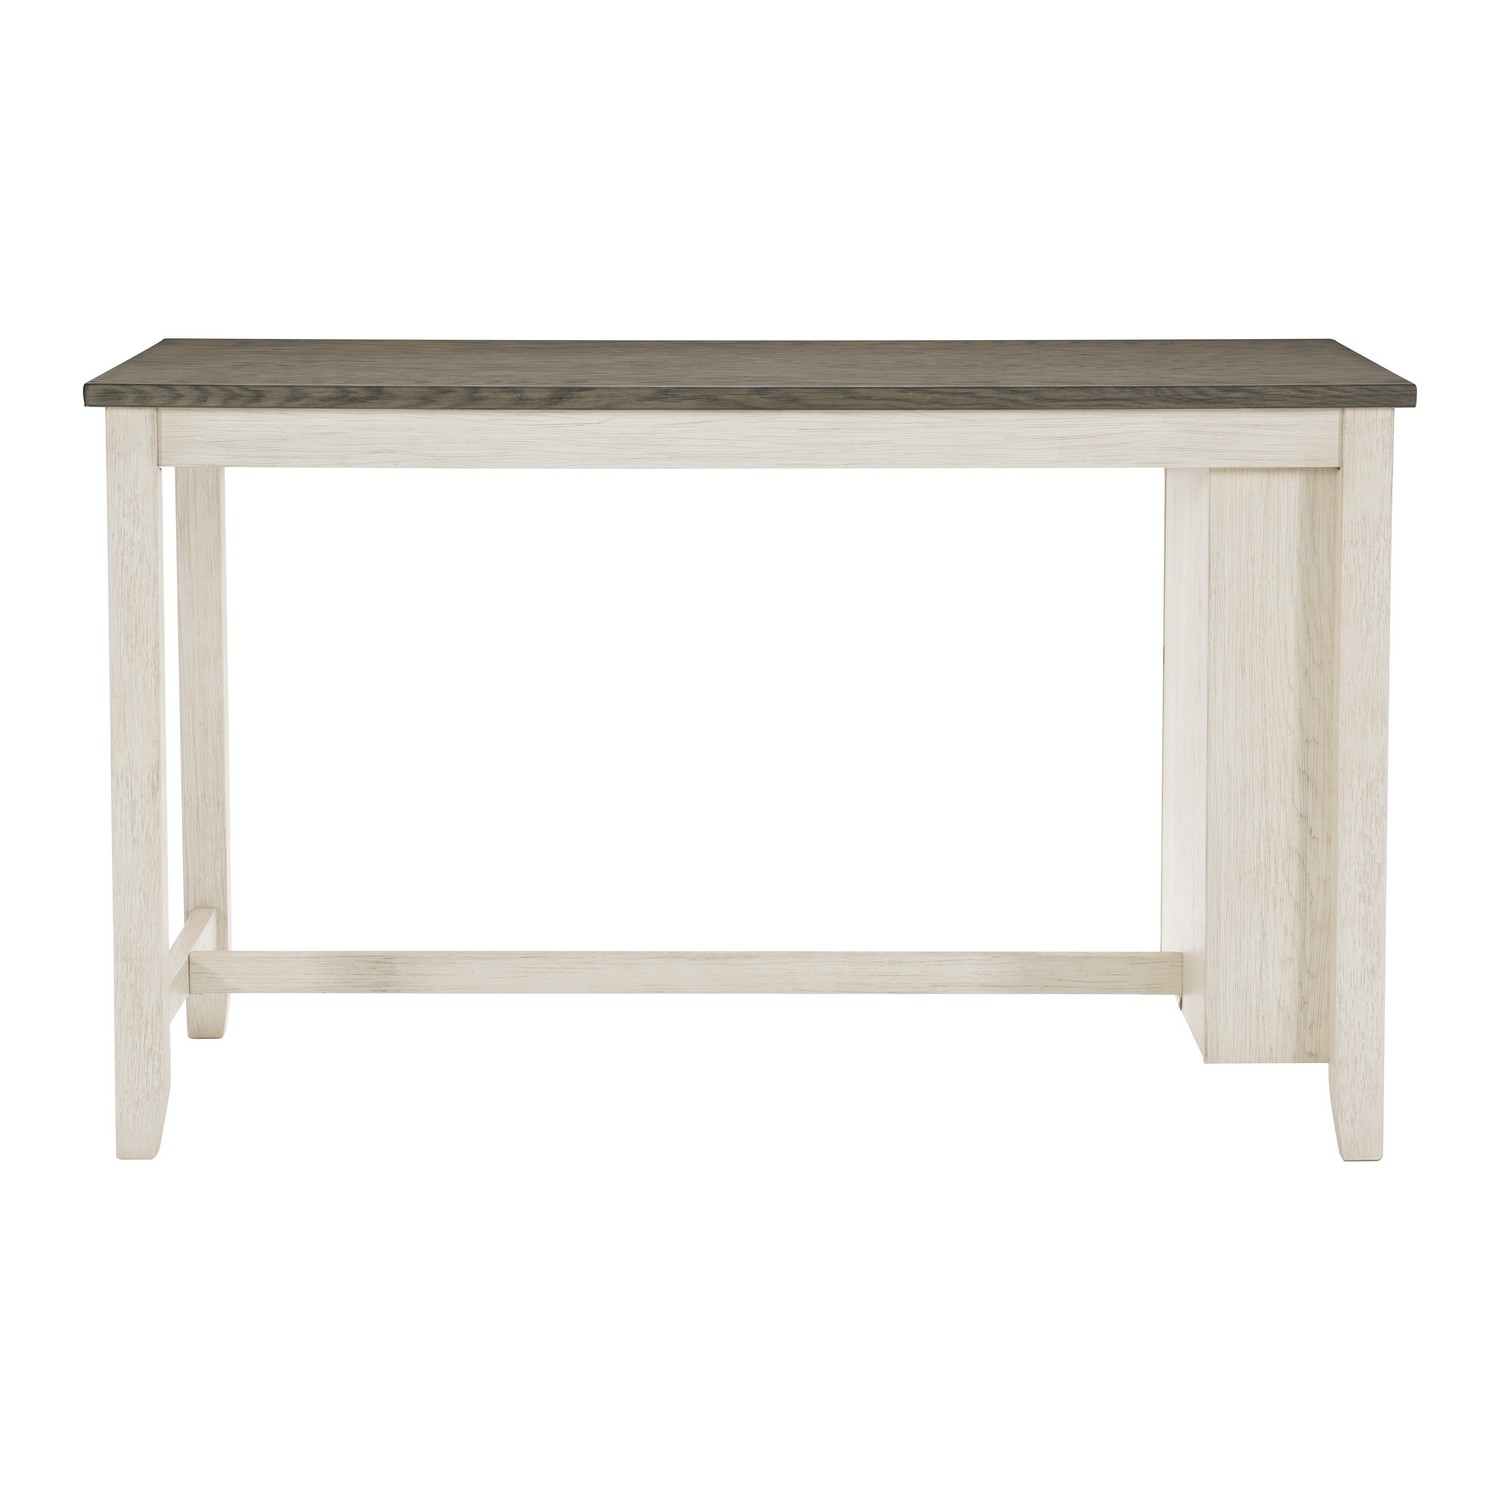 Homelegance Timbre Counter Height Table - Antique White/Rosy Brown